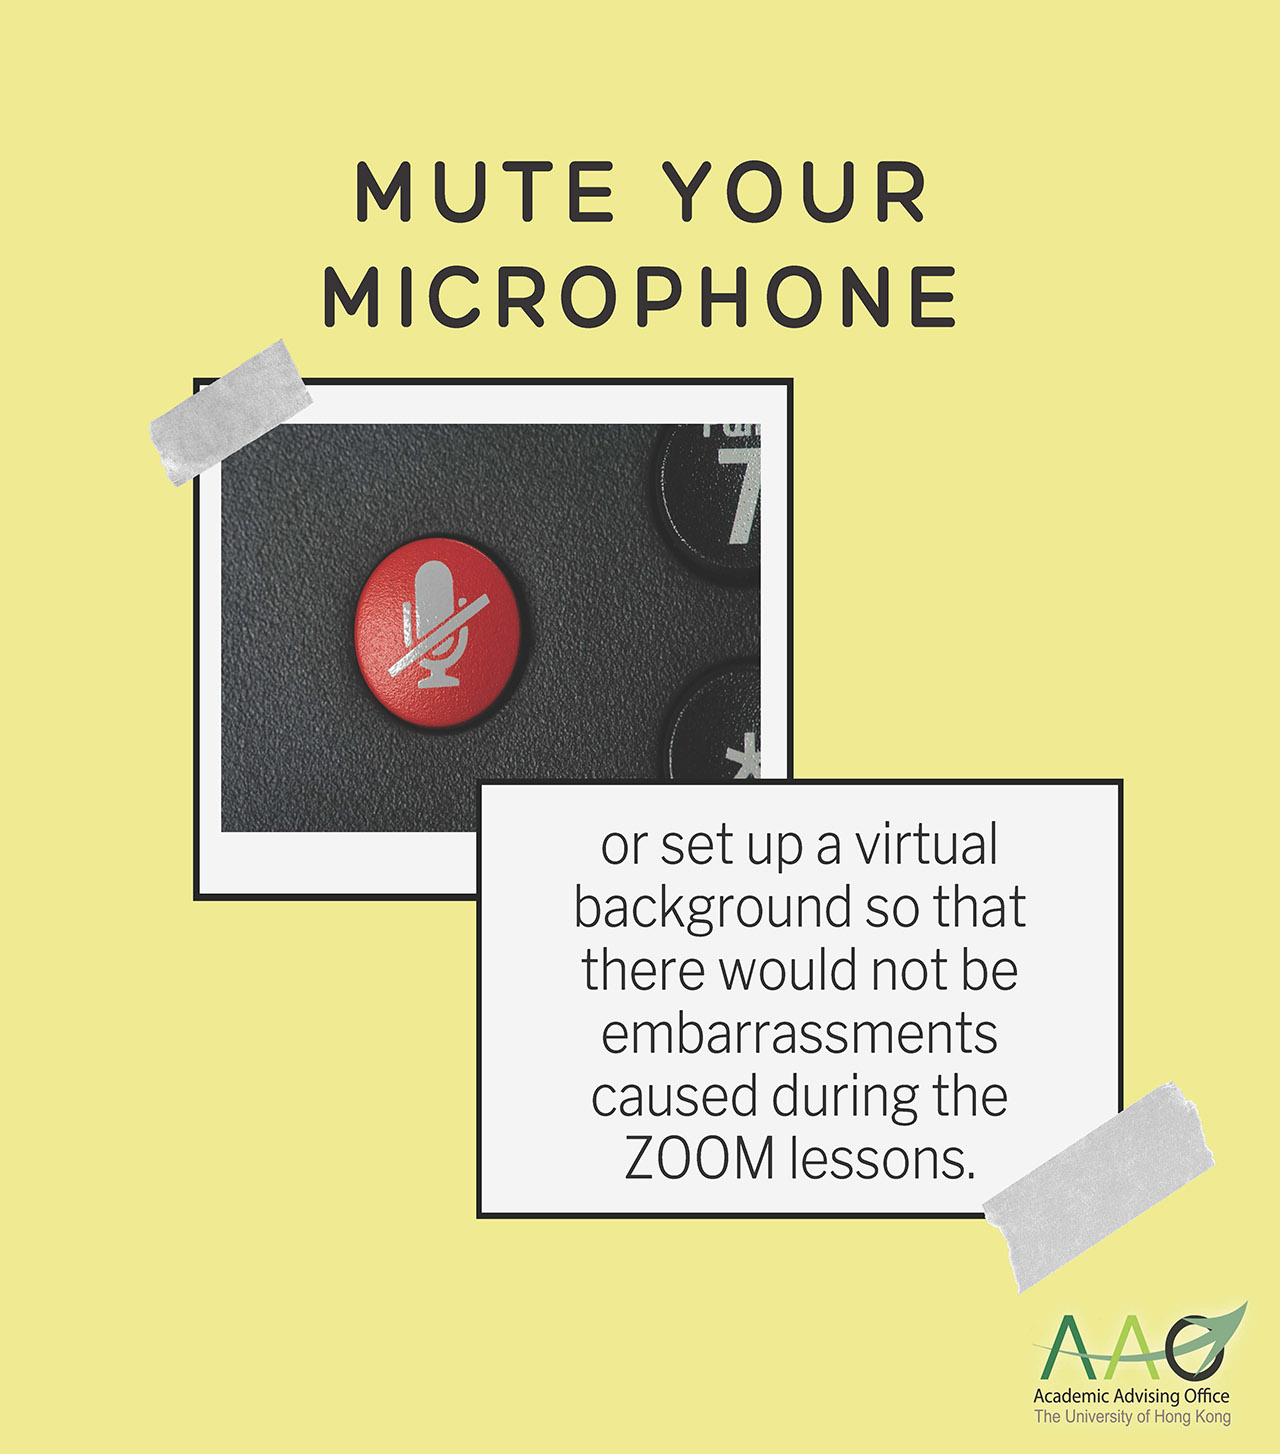 Mute your microphone or set up a virtual background so that there would not be embarrassments caused during the ZOOM lessons.